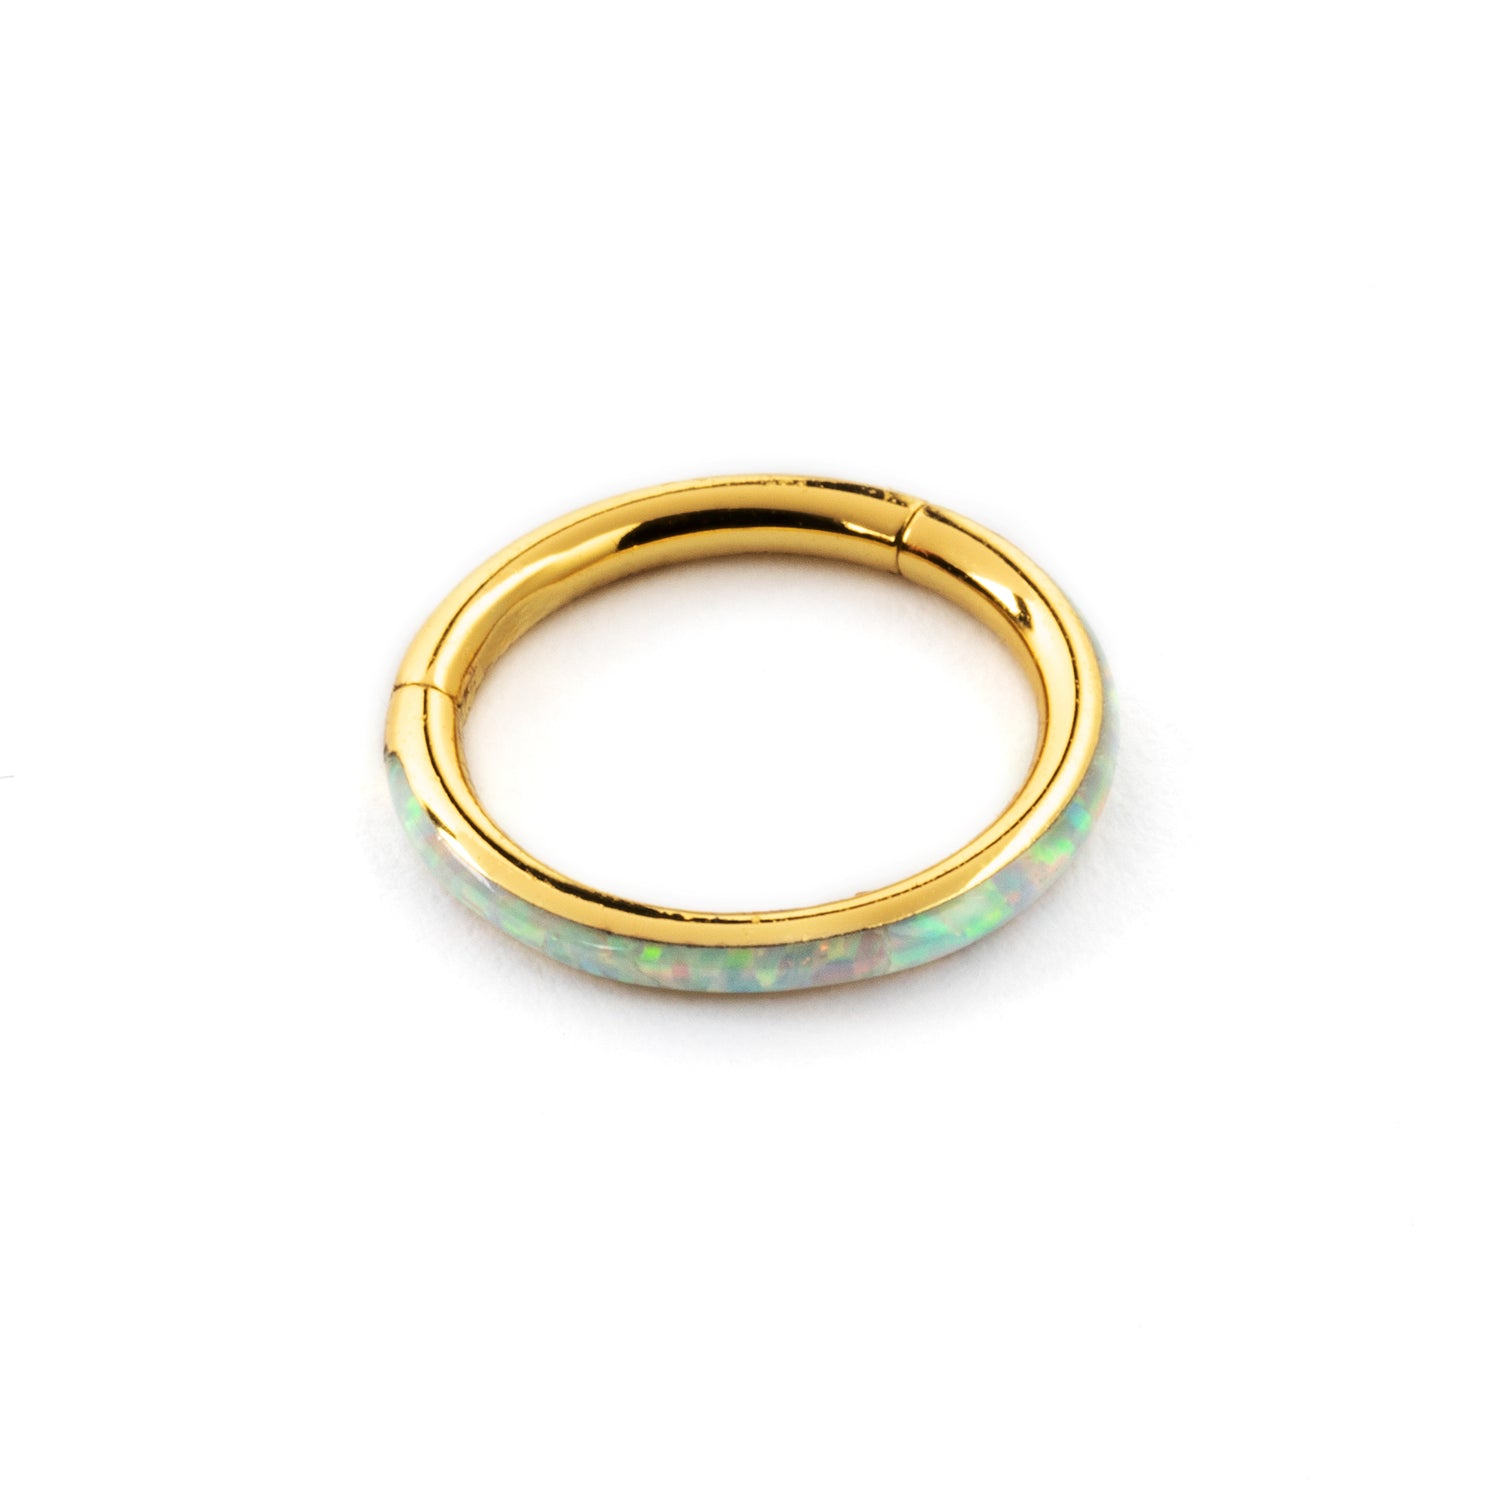 Gold surgical steel septum clicker ring with white opal inlay right side view 